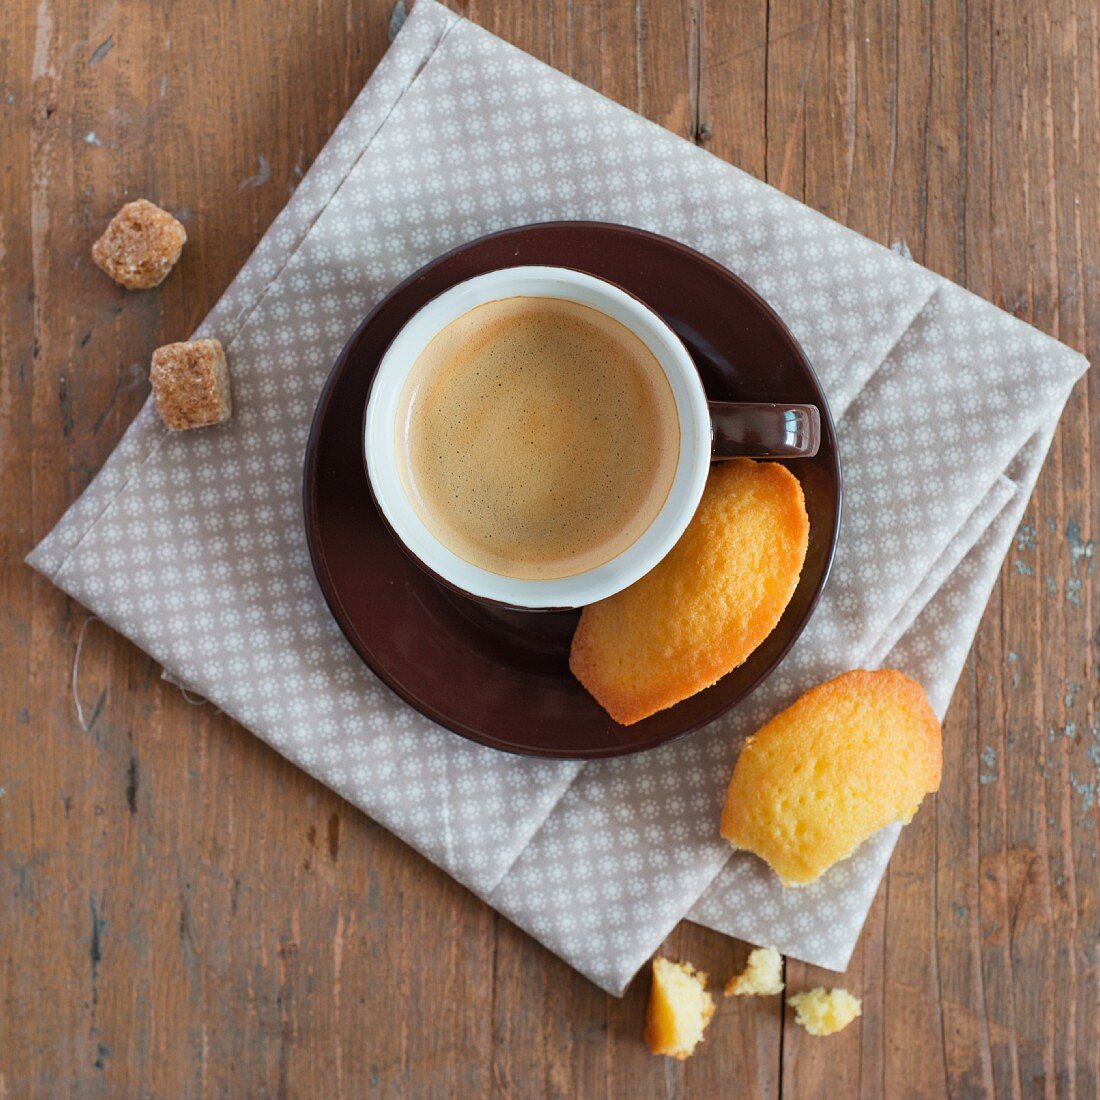 A cup of coffeee and madeleines